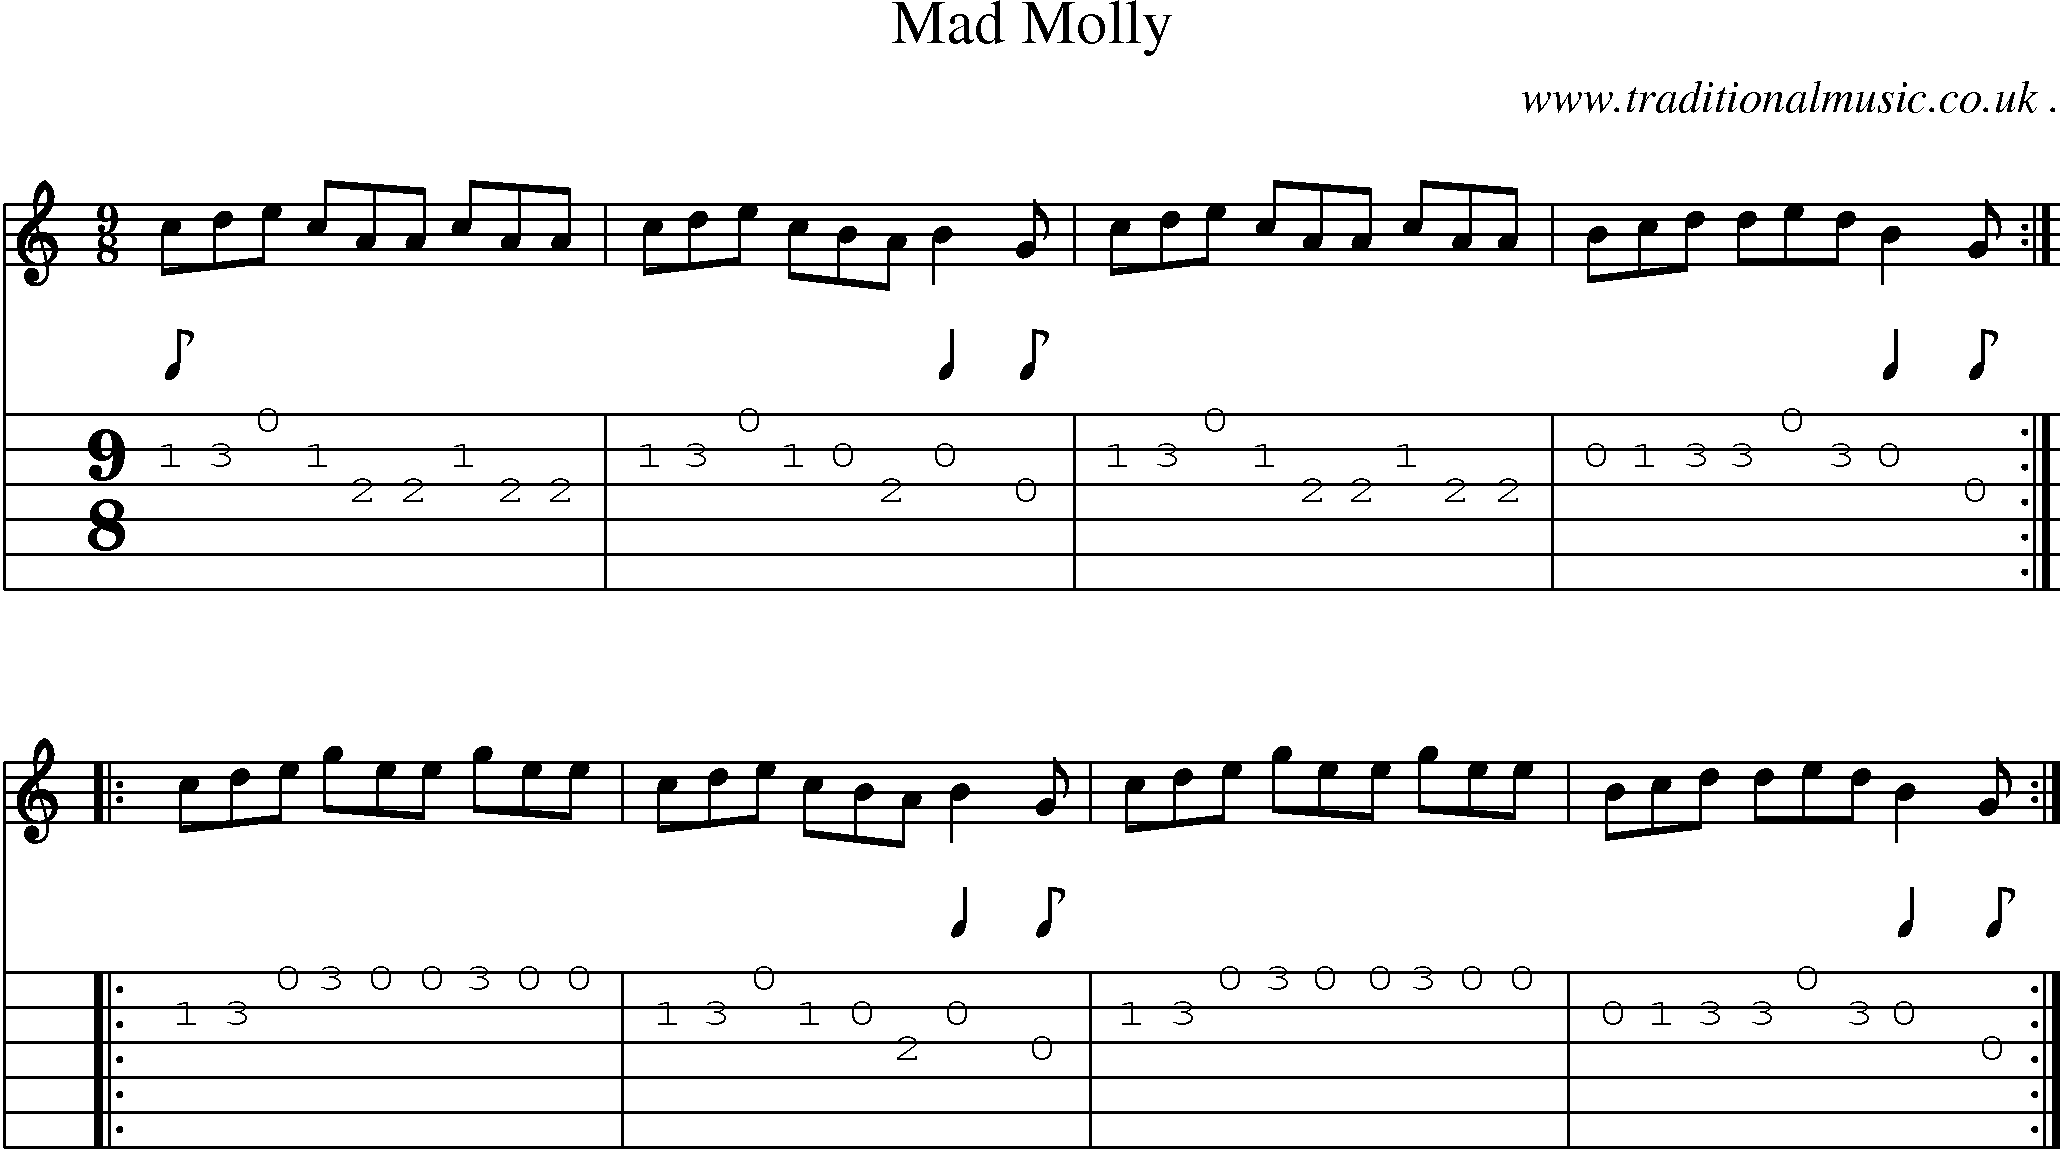 Sheet-Music and Guitar Tabs for Mad Molly